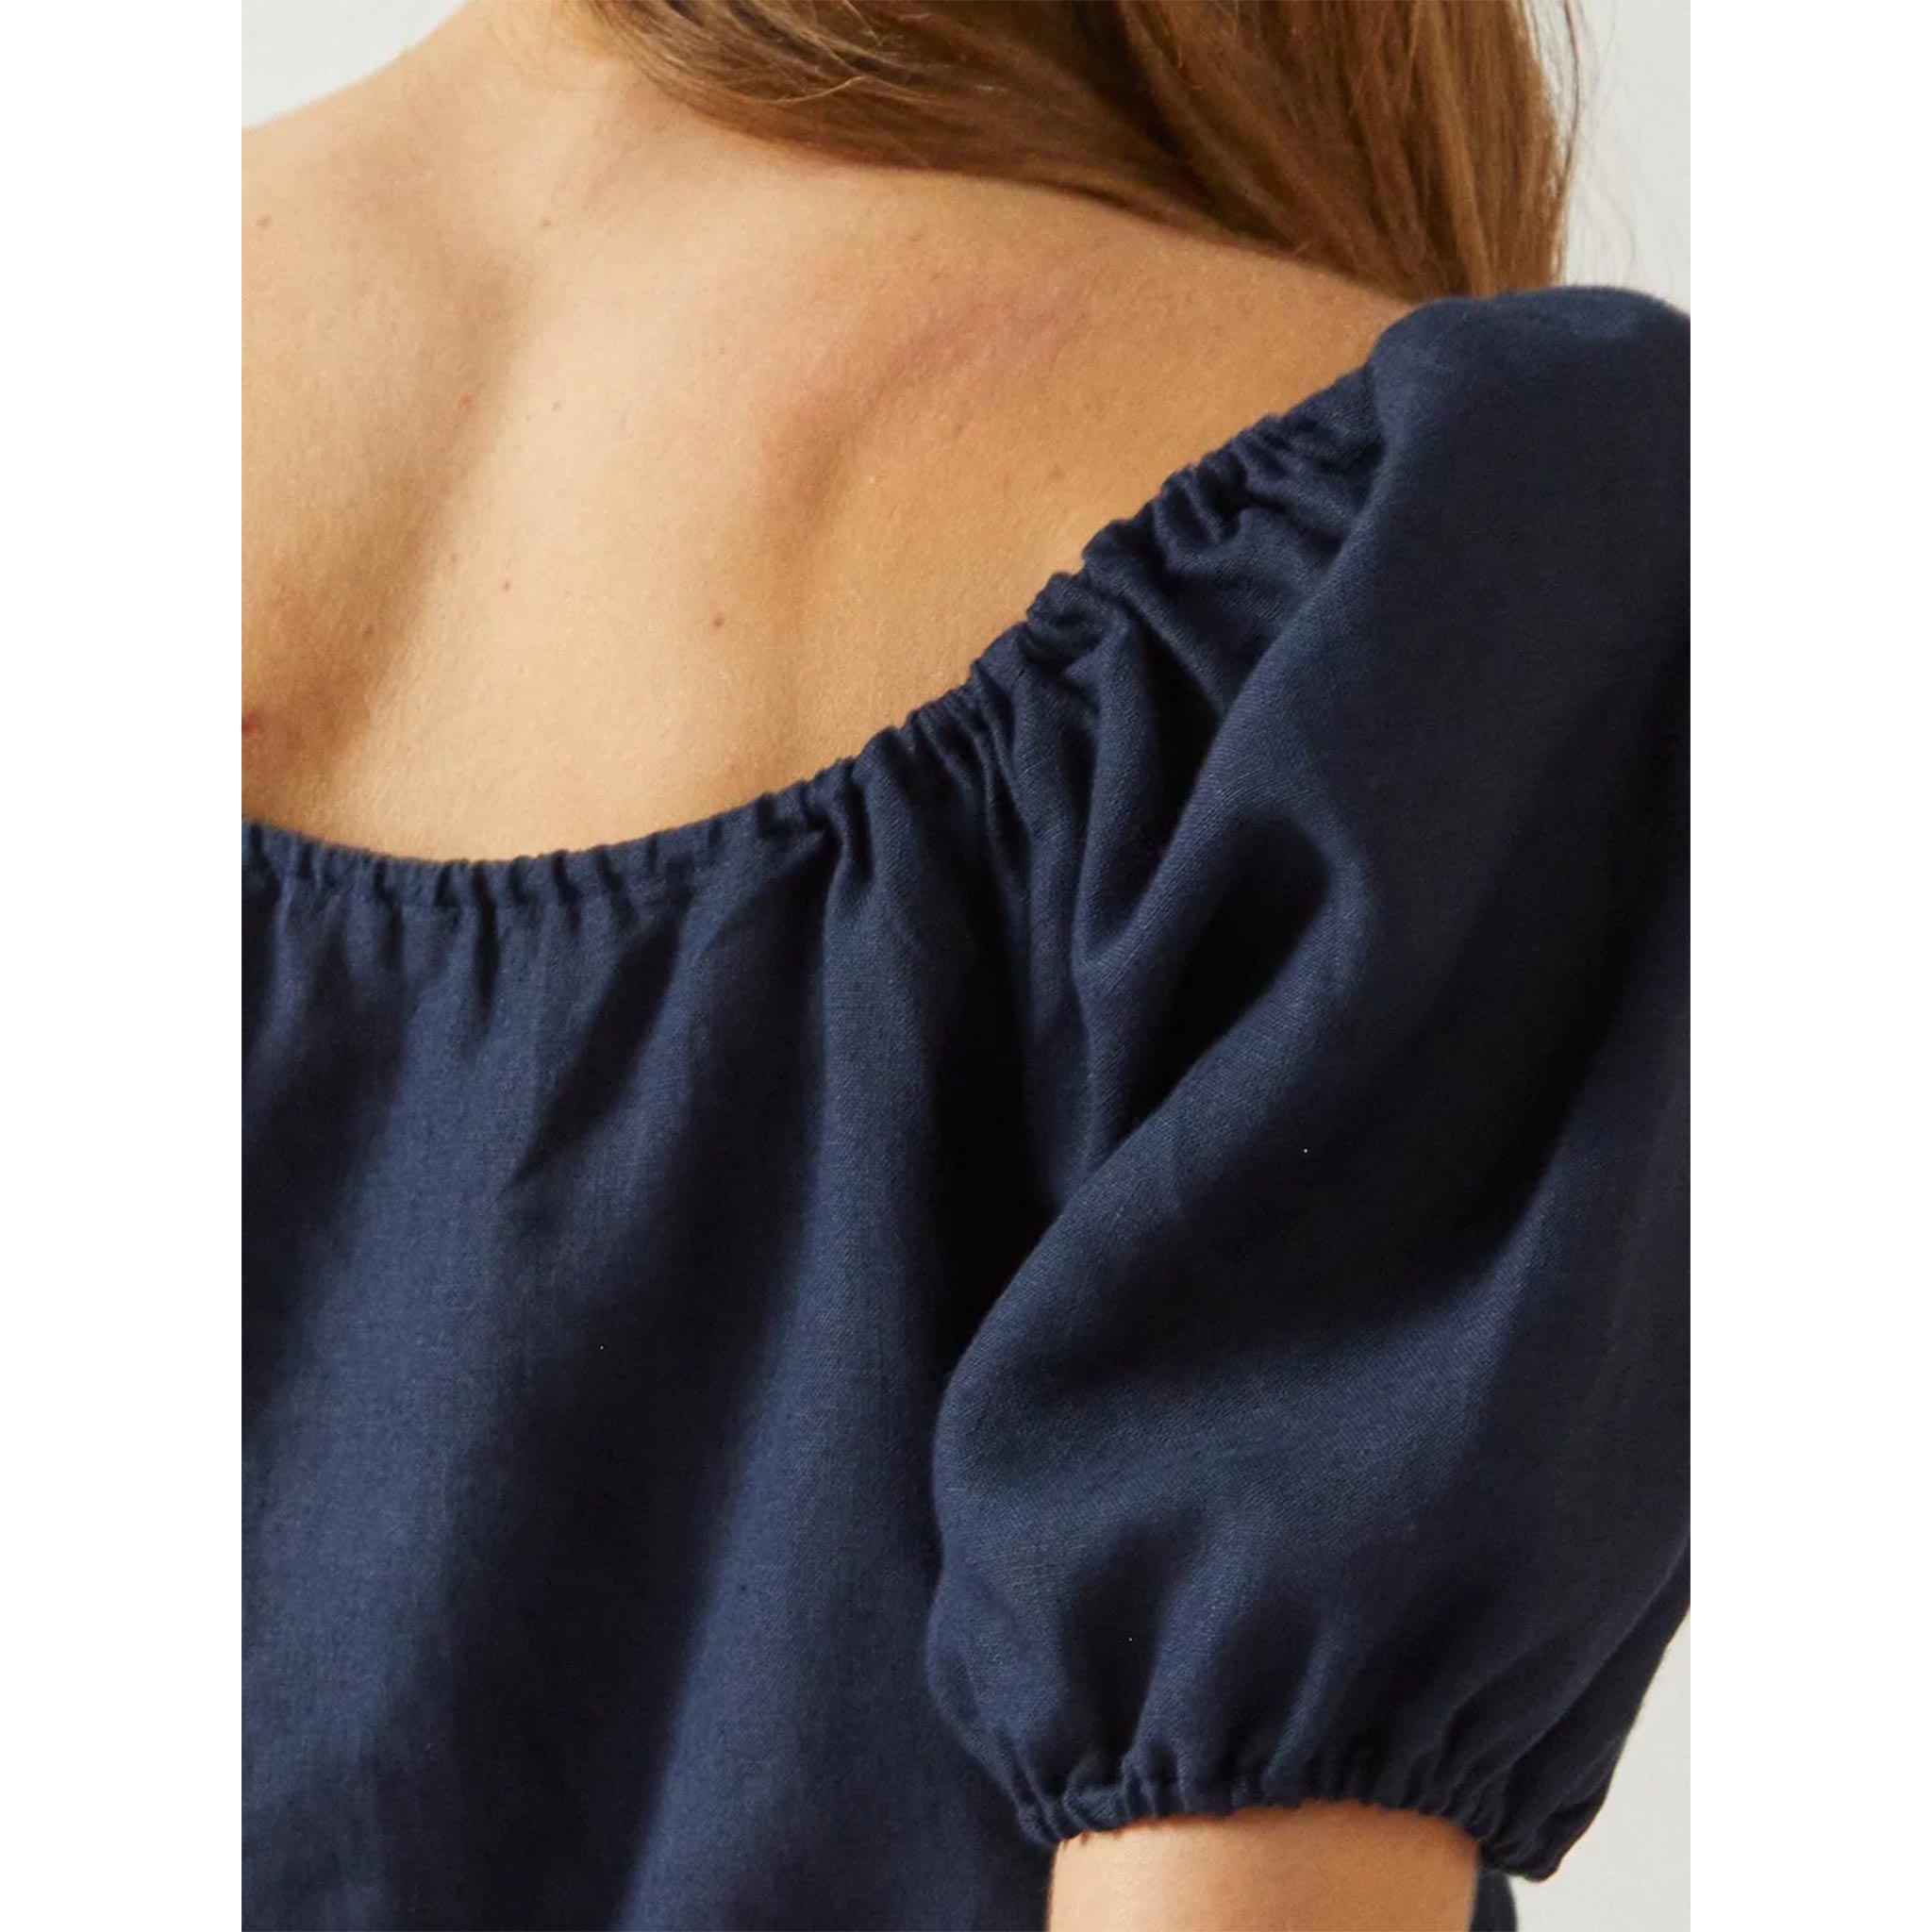 Rosa Blouse in Navy